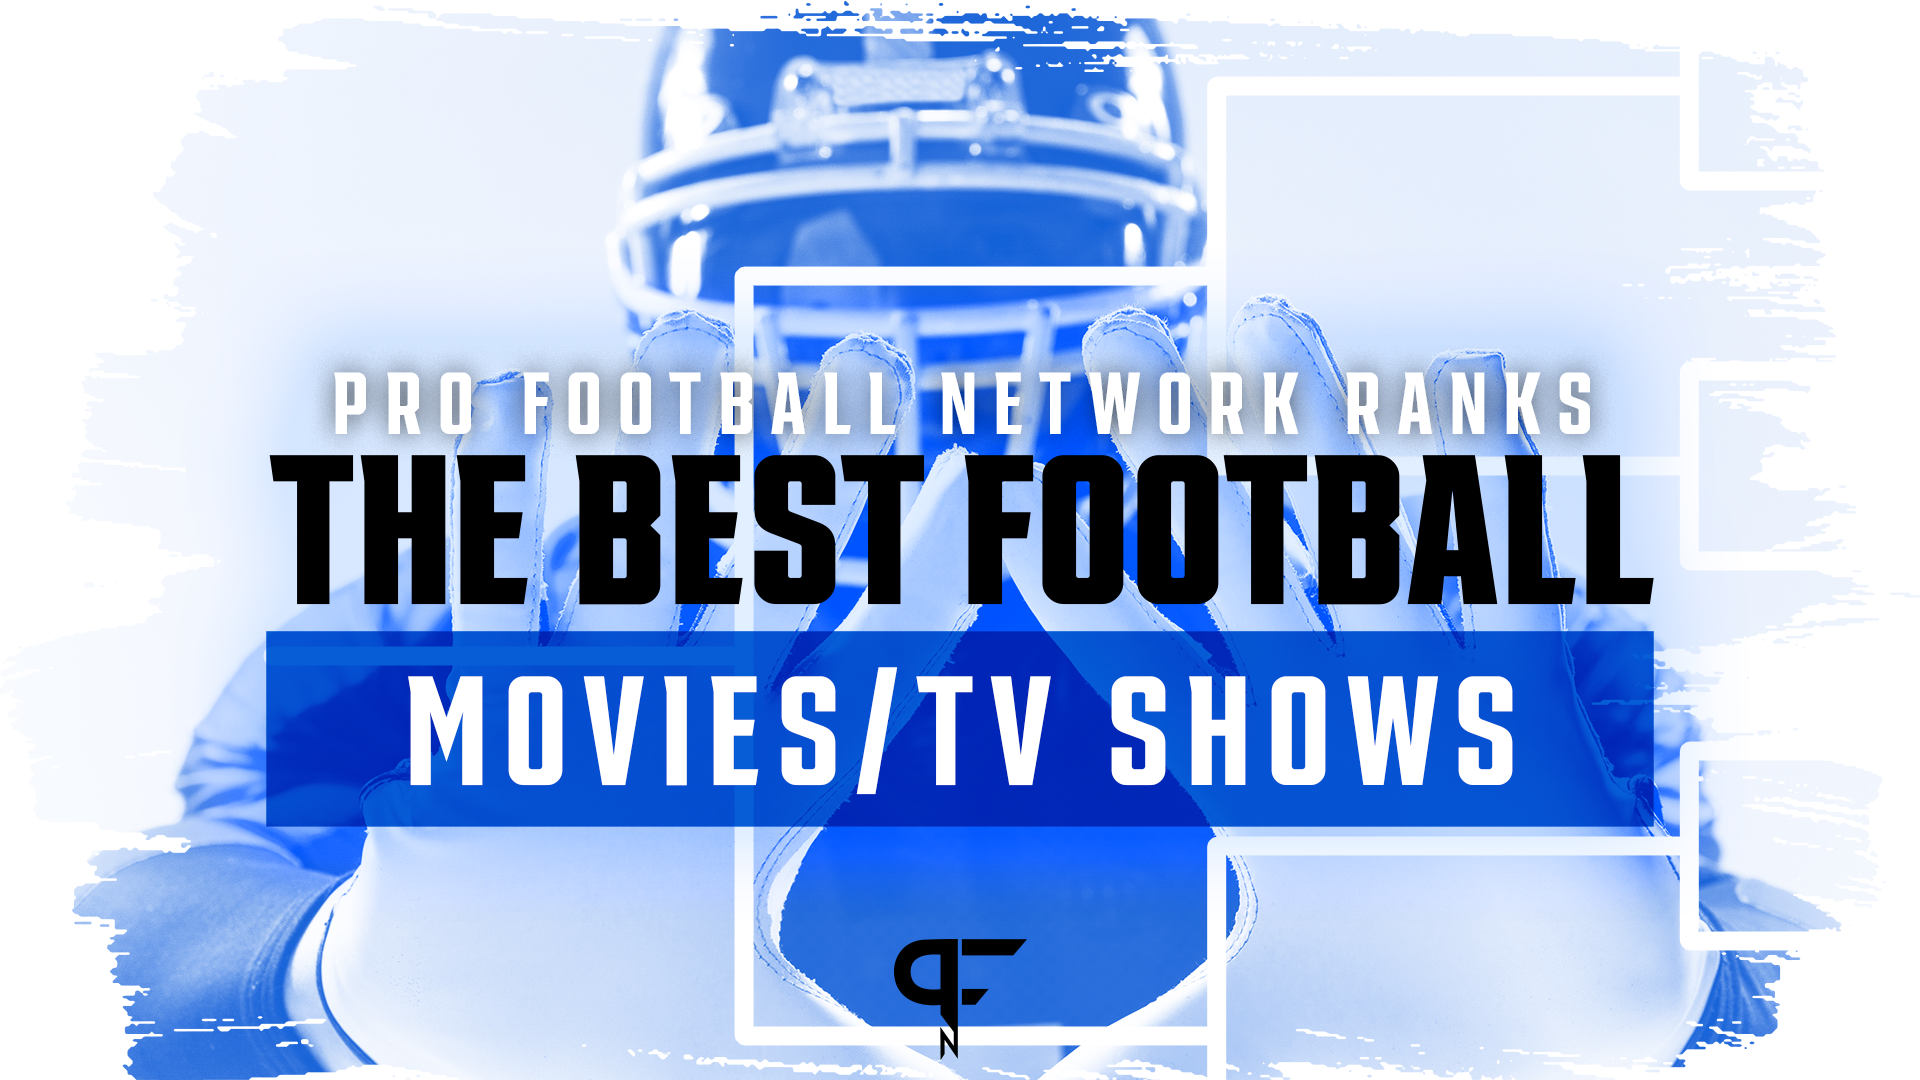 Best Football Movies and TV Shows March Madness Bracket To Help Decide Who Wins It All